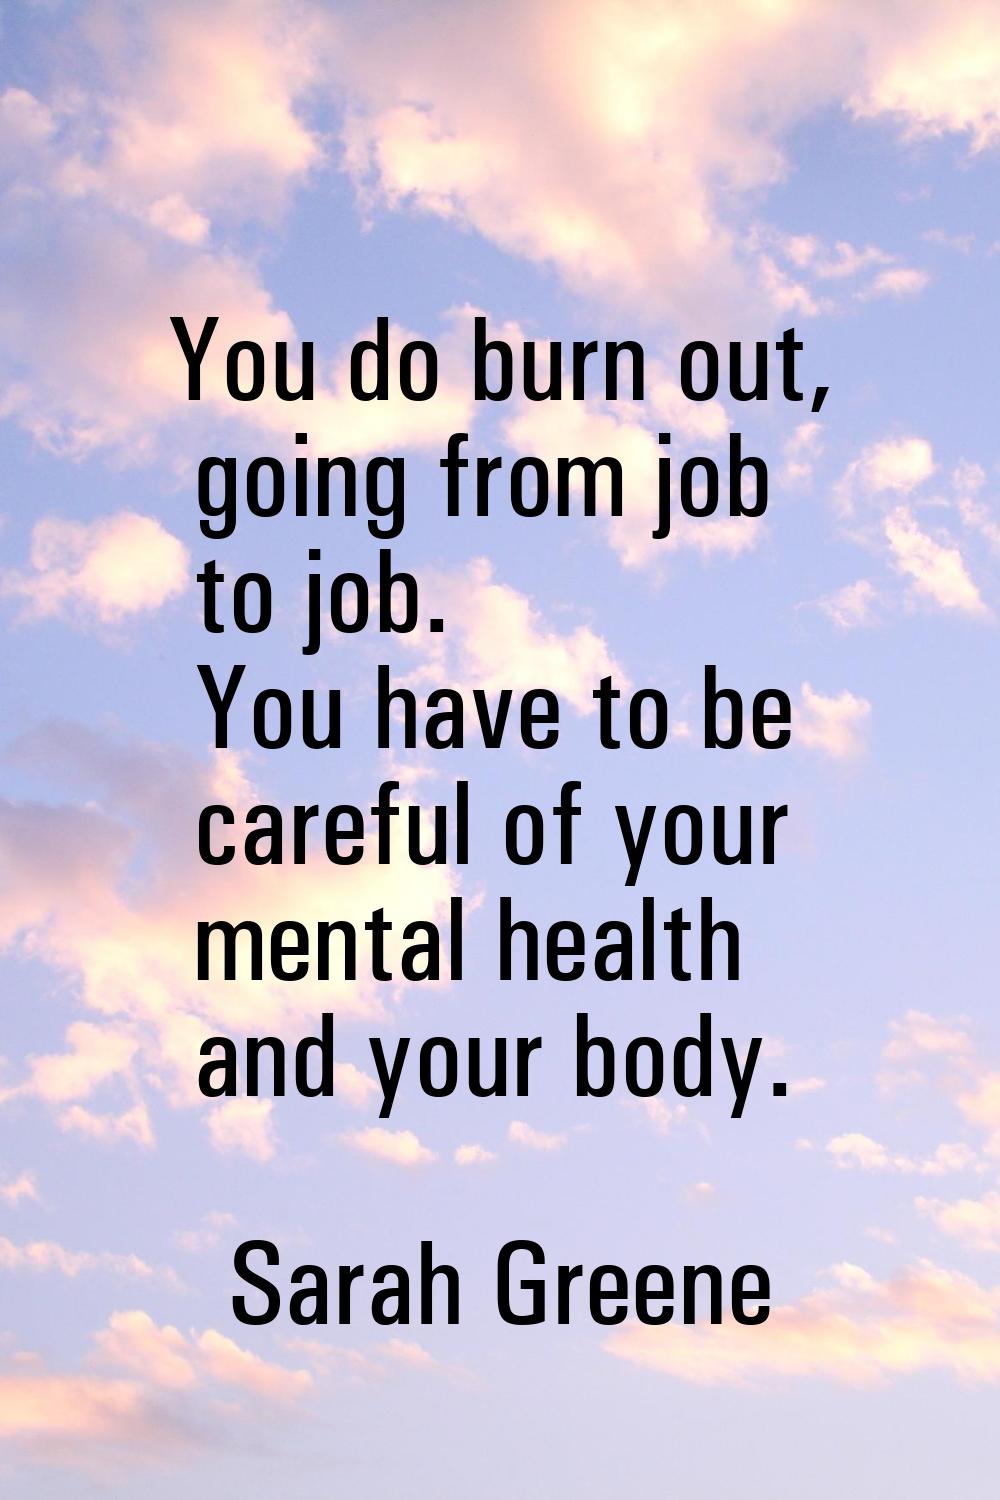 You do burn out, going from job to job. You have to be careful of your mental health and your body.